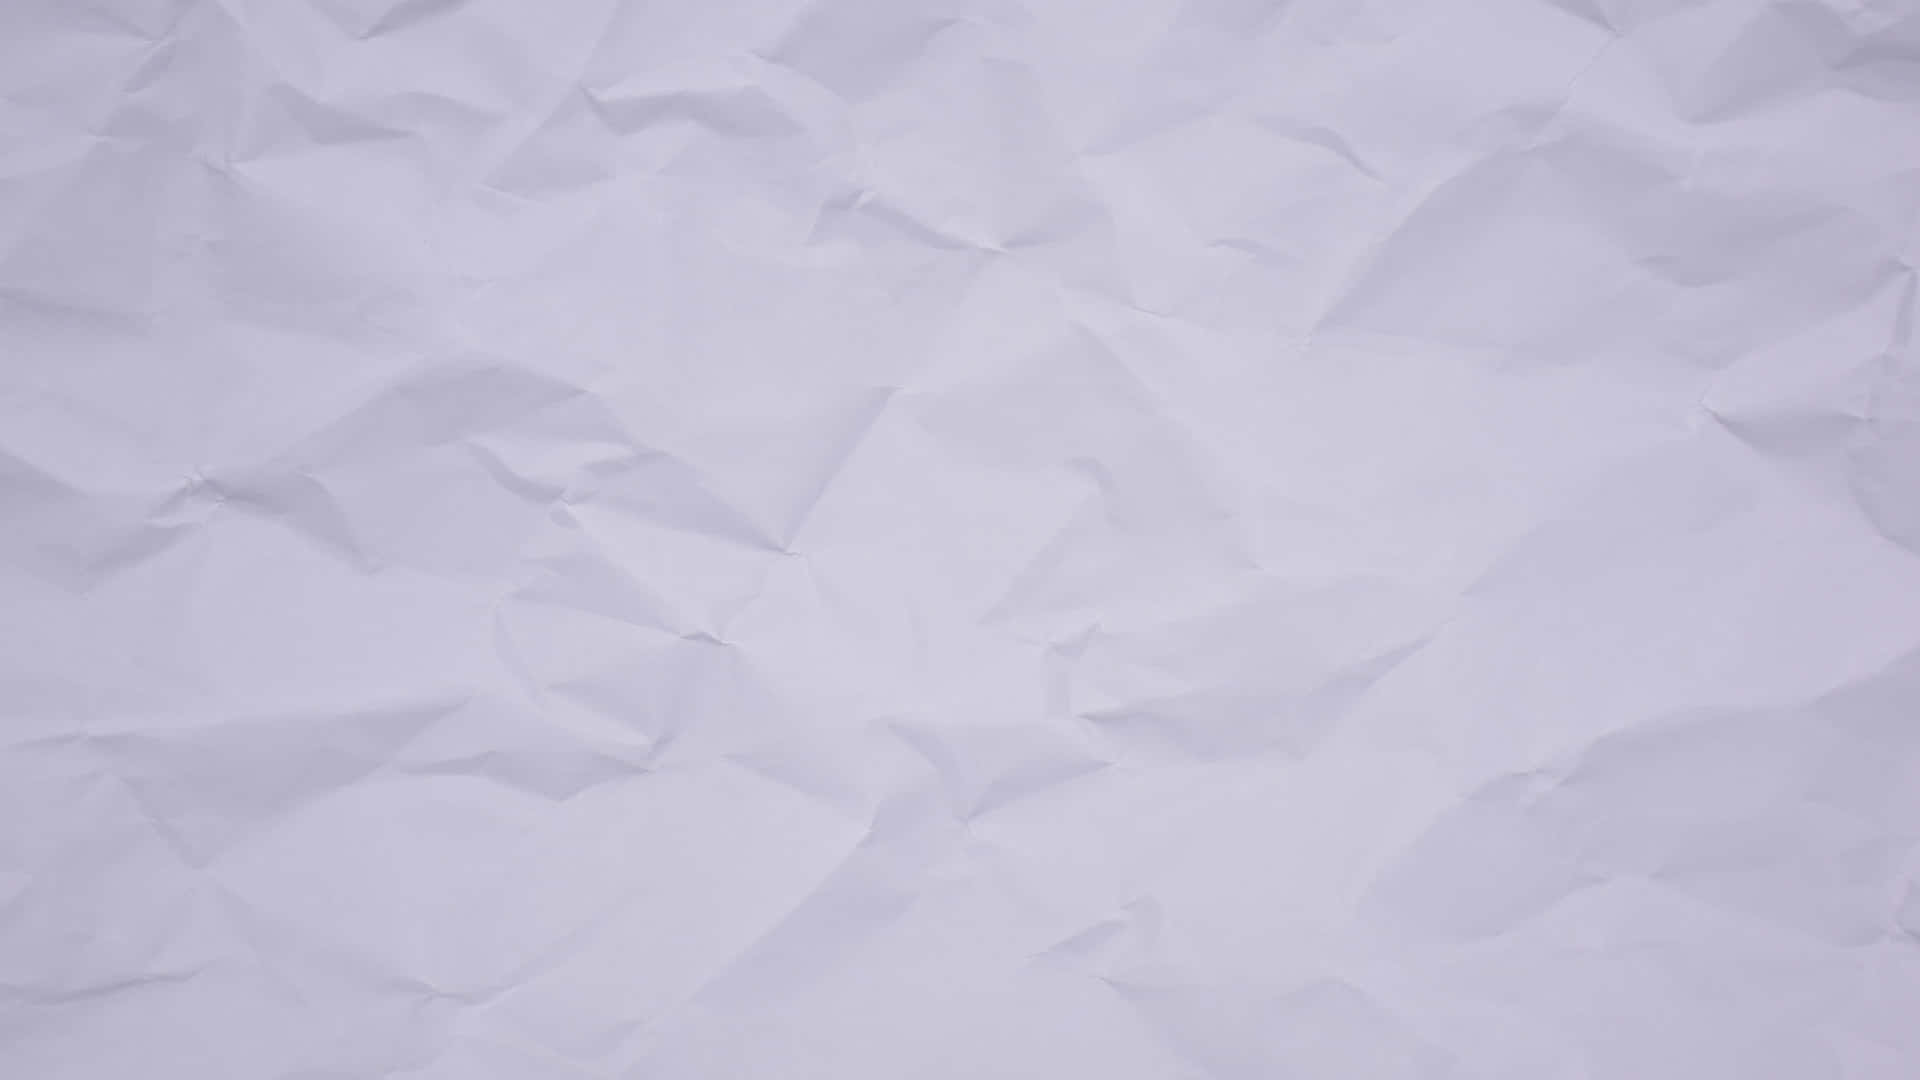 Stylish Seamless Paper Background for Your Design Projects